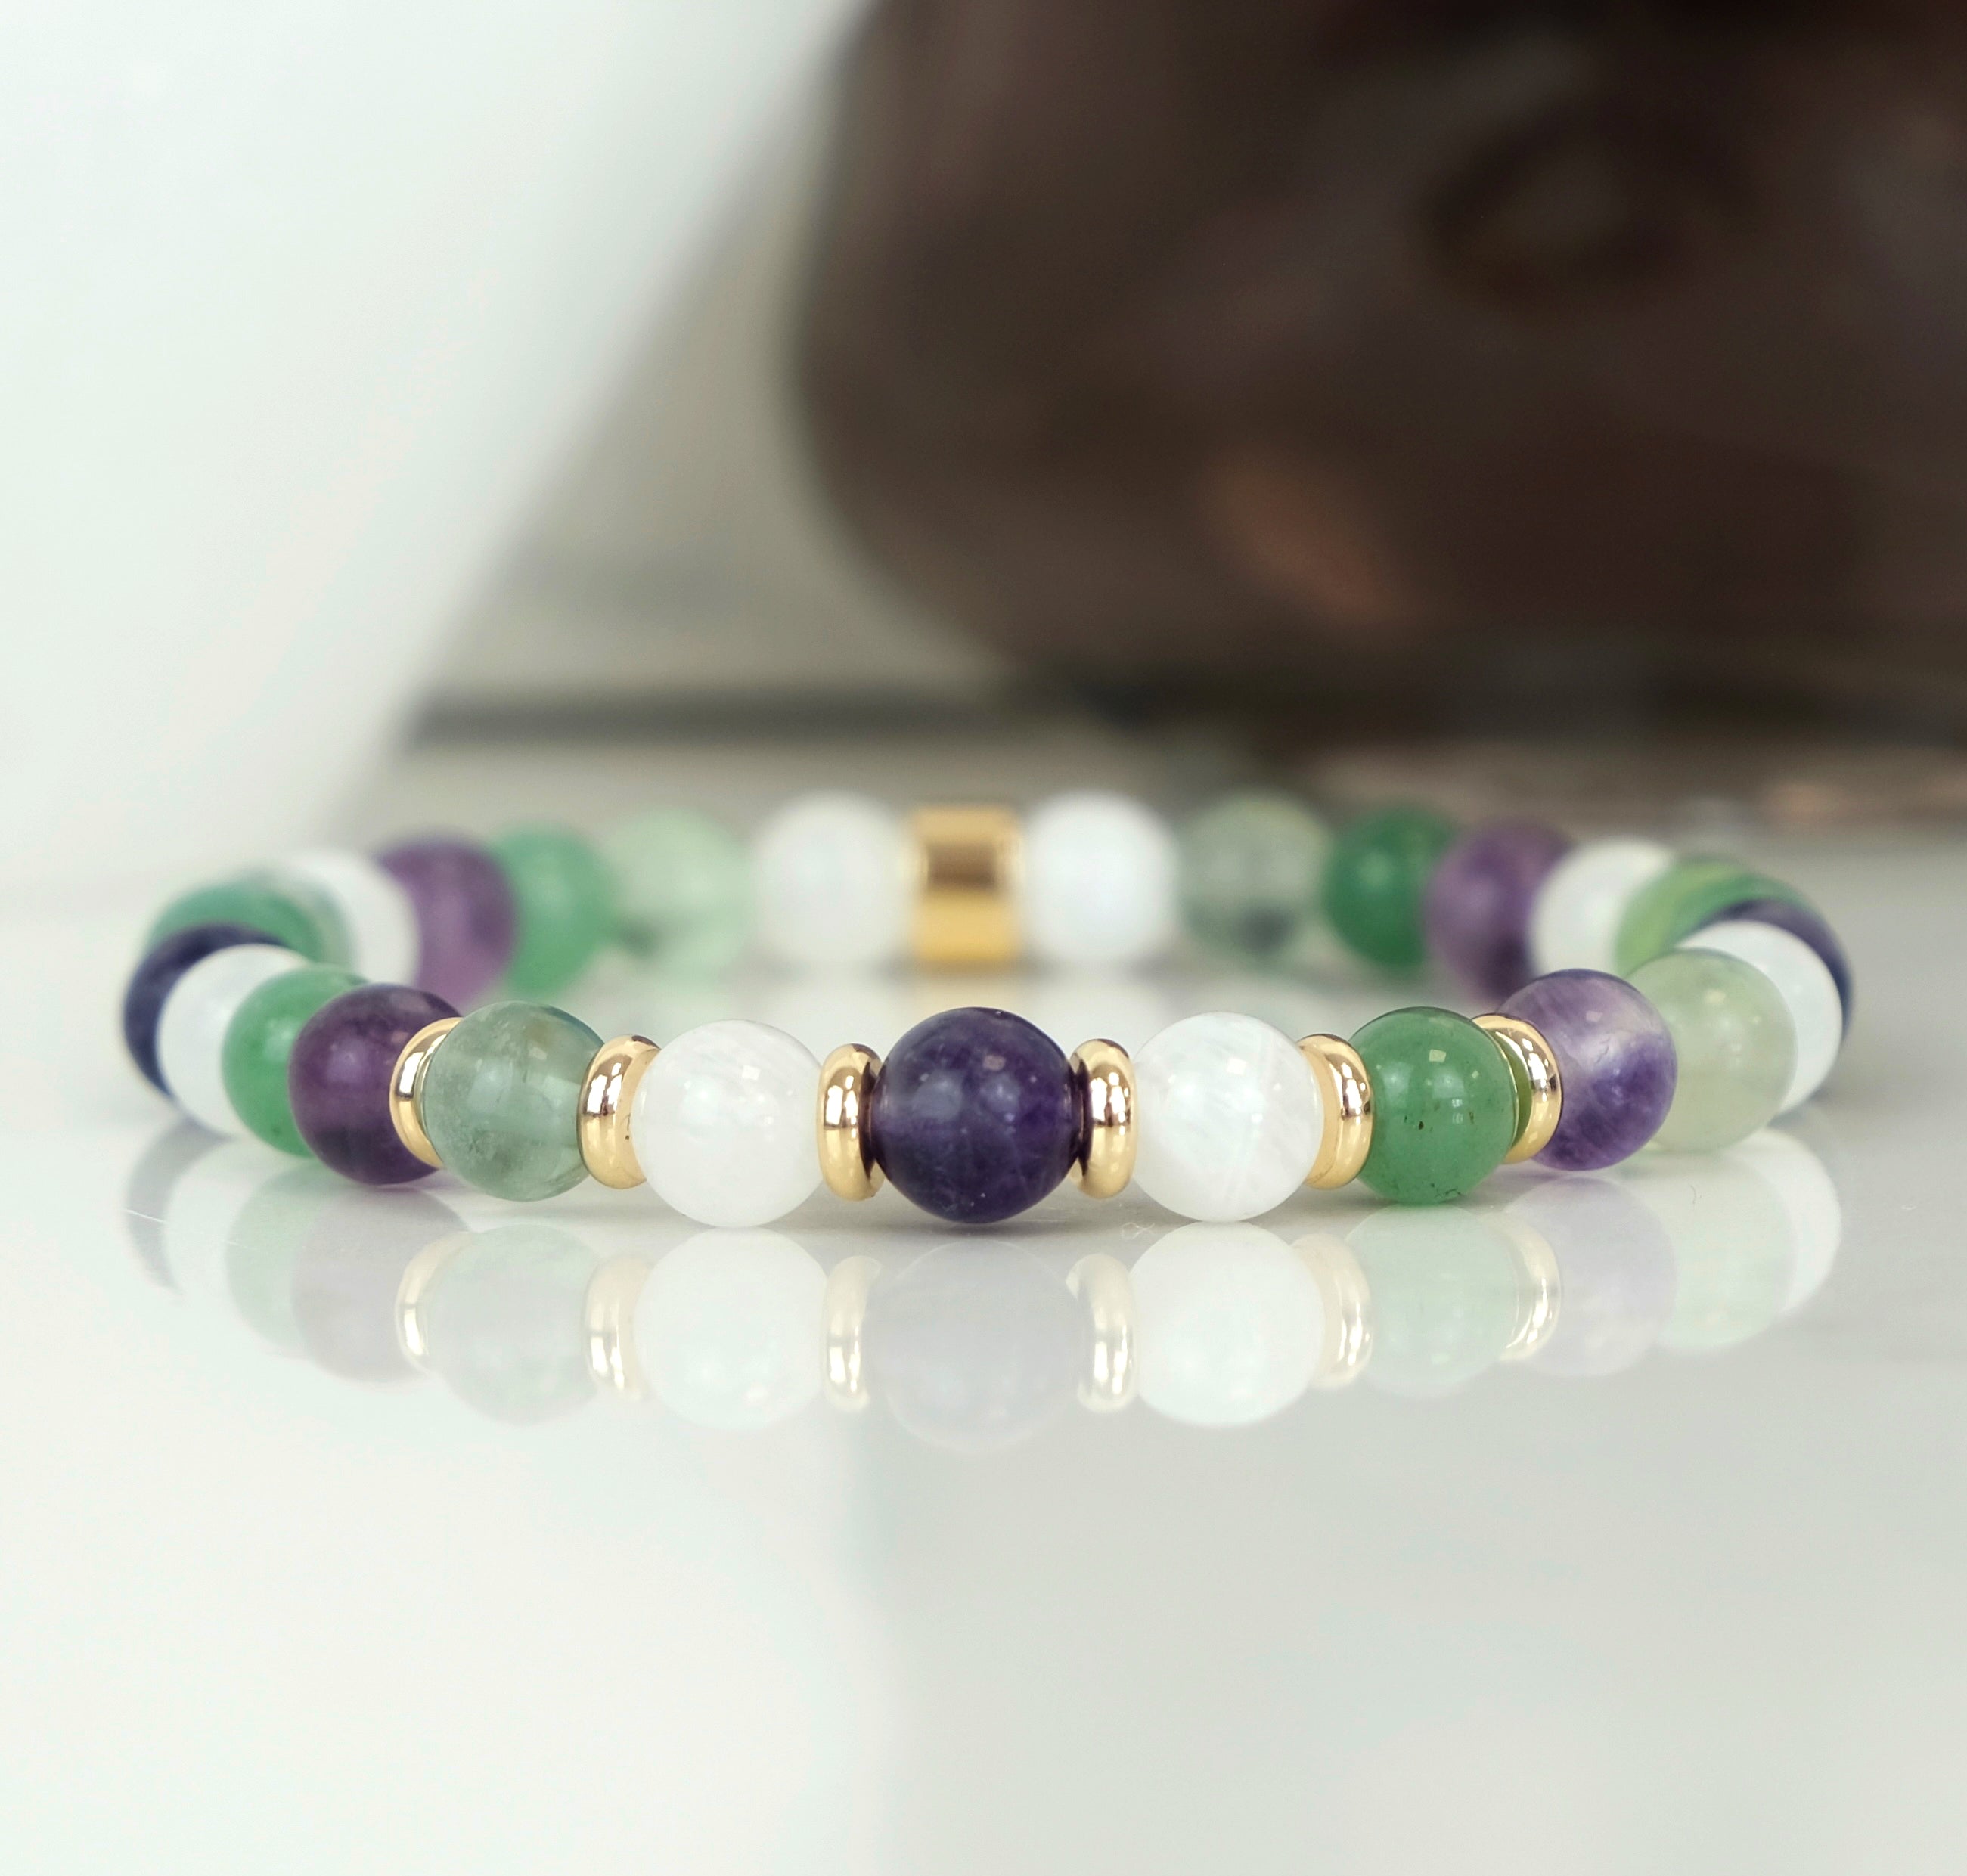 Amethyst, Aventurine and Moonstone 6mm gemstone bracelet with 18ct gold plated accessories